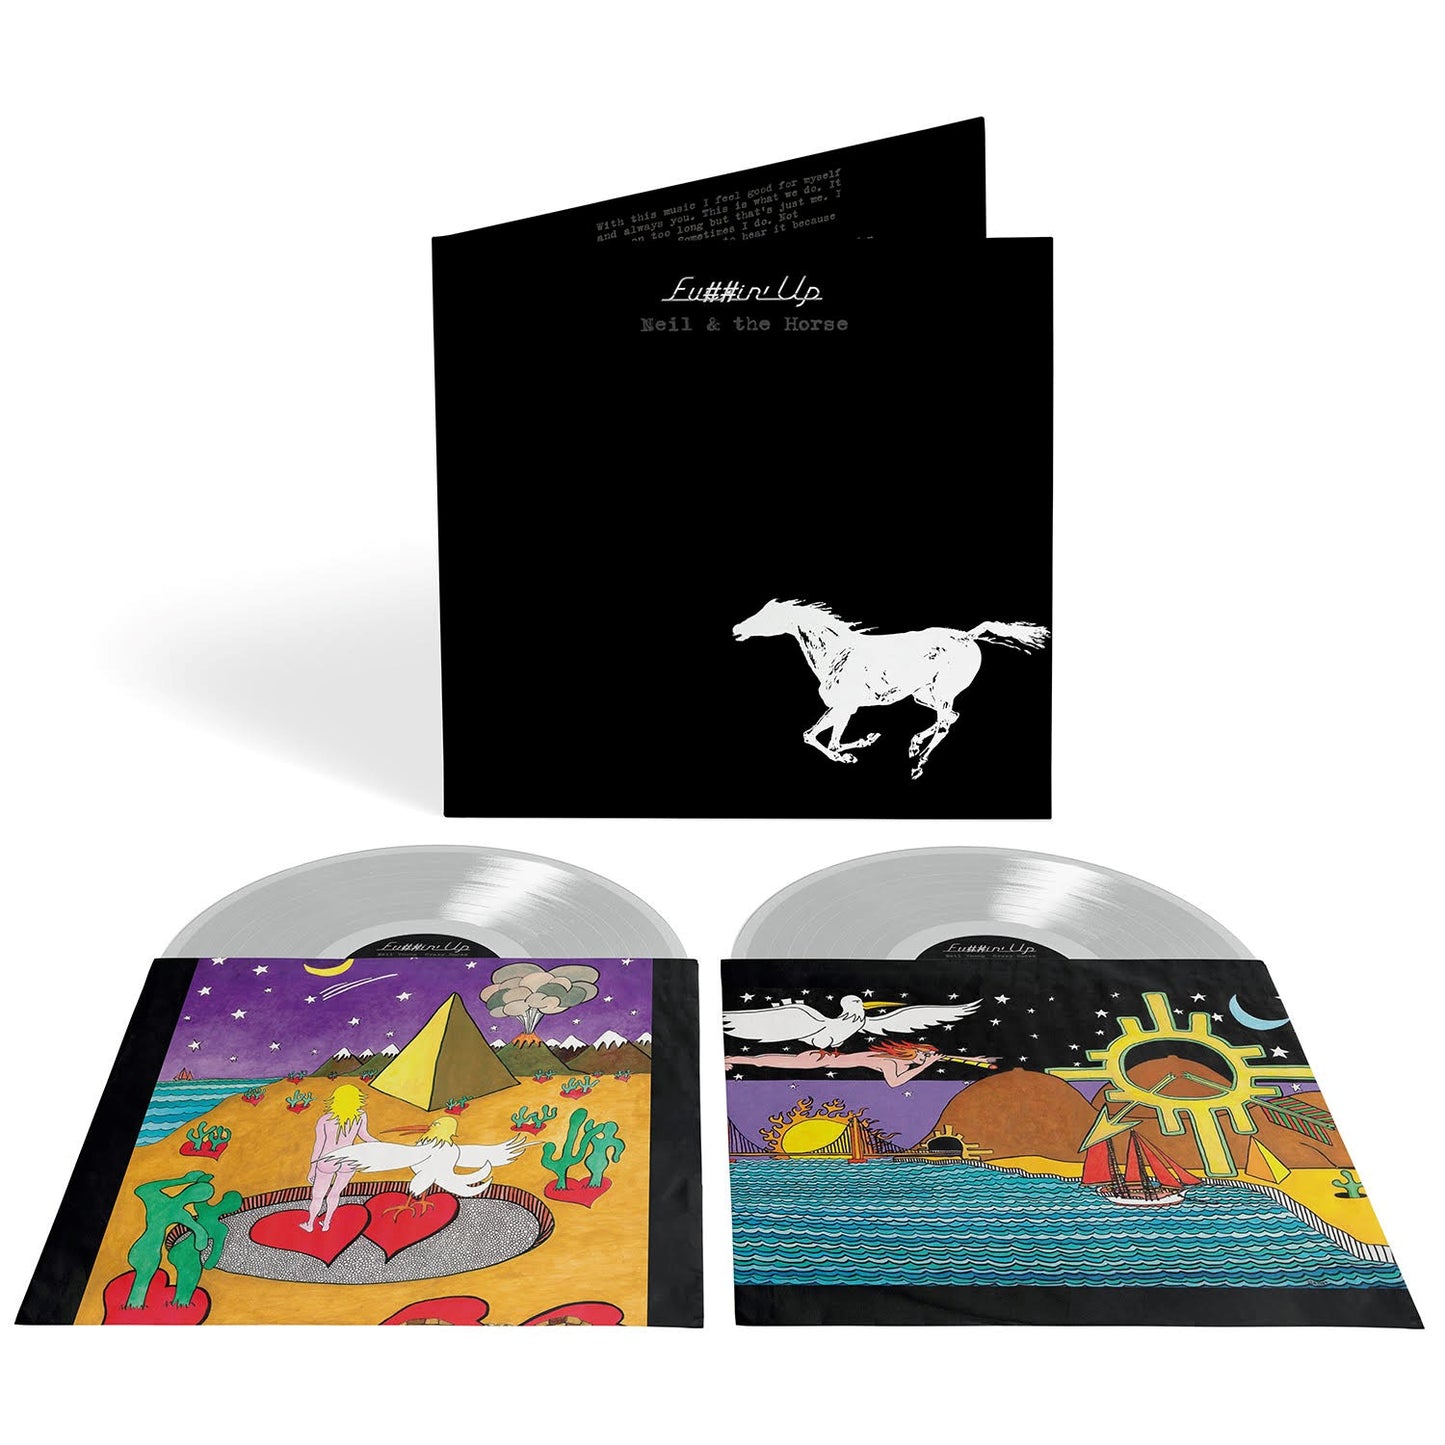 Neil Young & Crazy Horse - F*#!IN UP (RSD24)